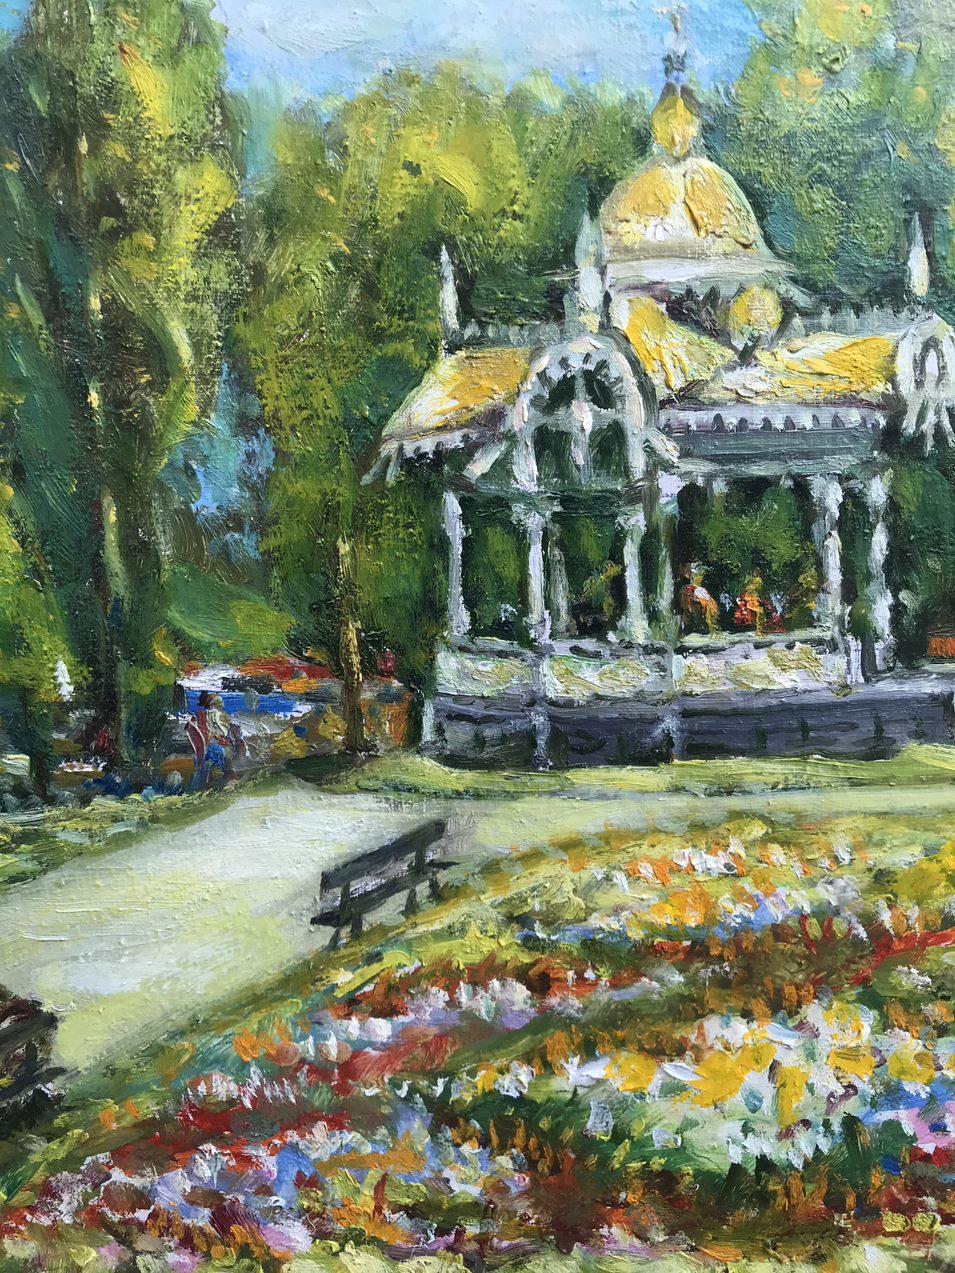 Artist: Shapoval Ivan Leontyevich
Work: Original oil painting, handmade artwork, one of a kind 
Medium: Oil on Canvas
Style: Impressionism
Year: 2012
Title: Garden House
Size: 16.5